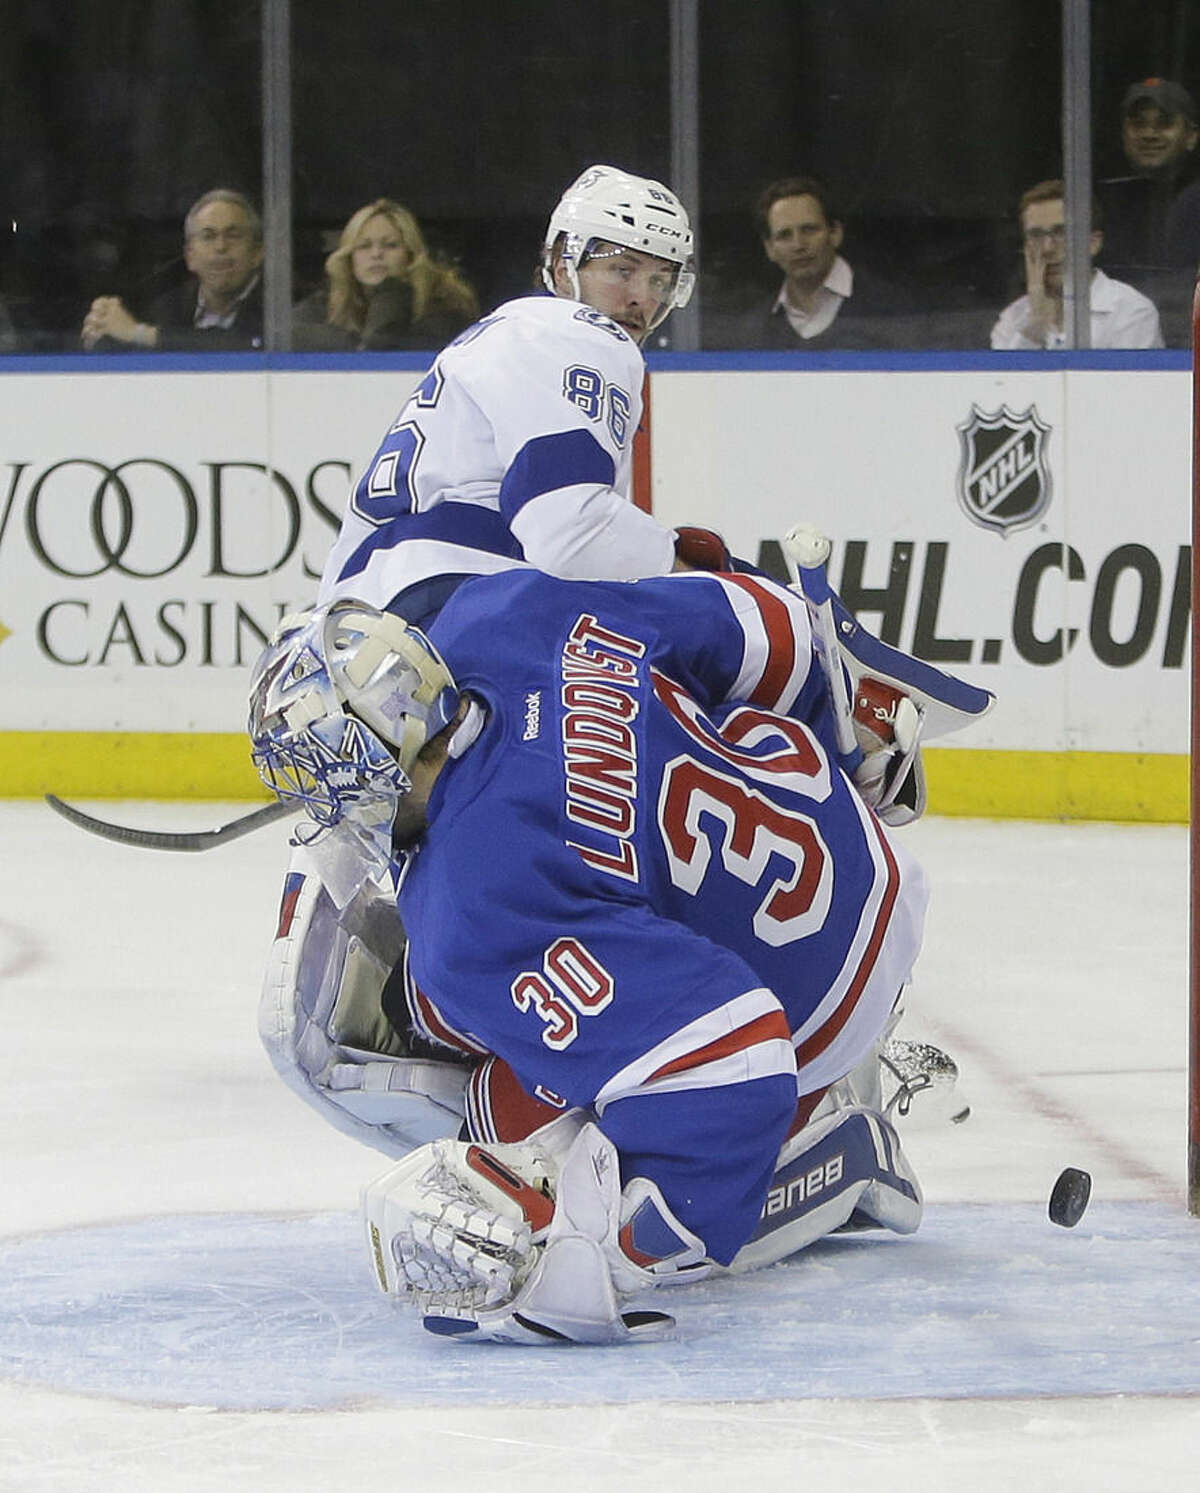 Tampa Bay Lightning's Nikita Kucherov (86), of Russia, scores on New York Rangers goalie Henrik Lundqvist (30), of Sweden, during the first period of an NHL hockey game Monday, Nov. 17, 2014, in New York. (AP Photo/Frank Franklin II)